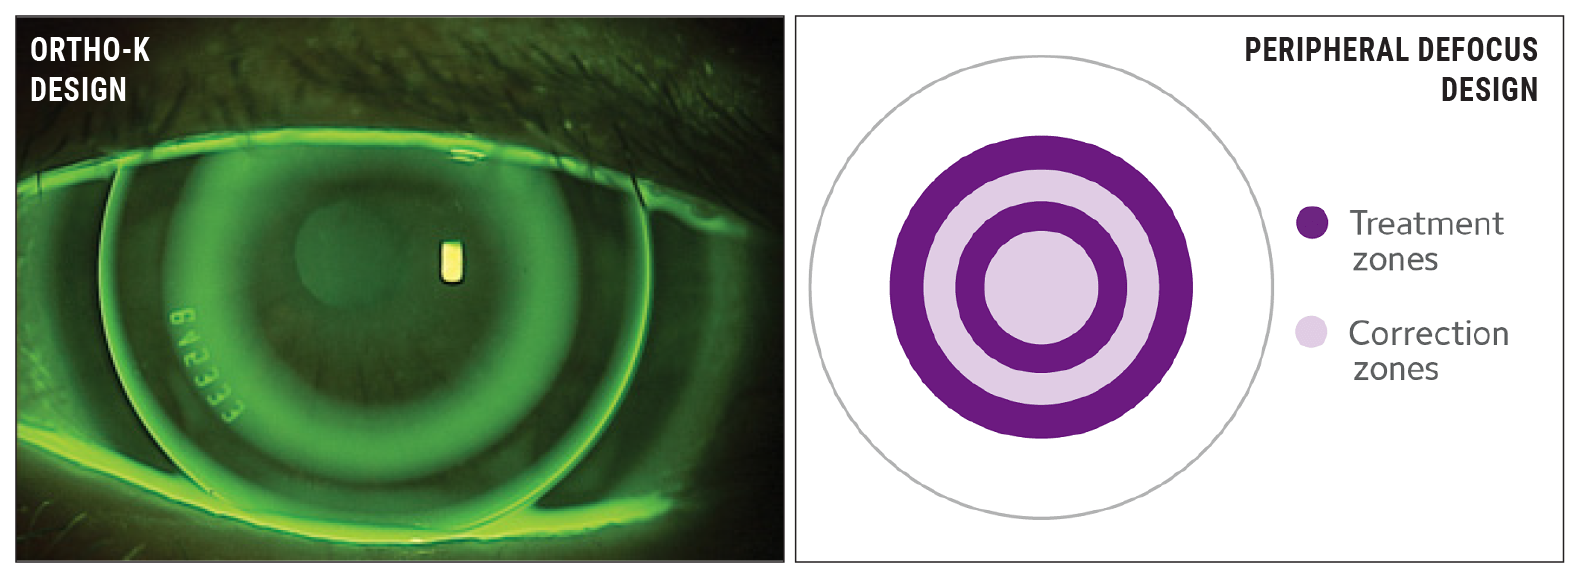 Ortho-K and multifocal lenses in children undergoing treatment match results from clinical trials. 